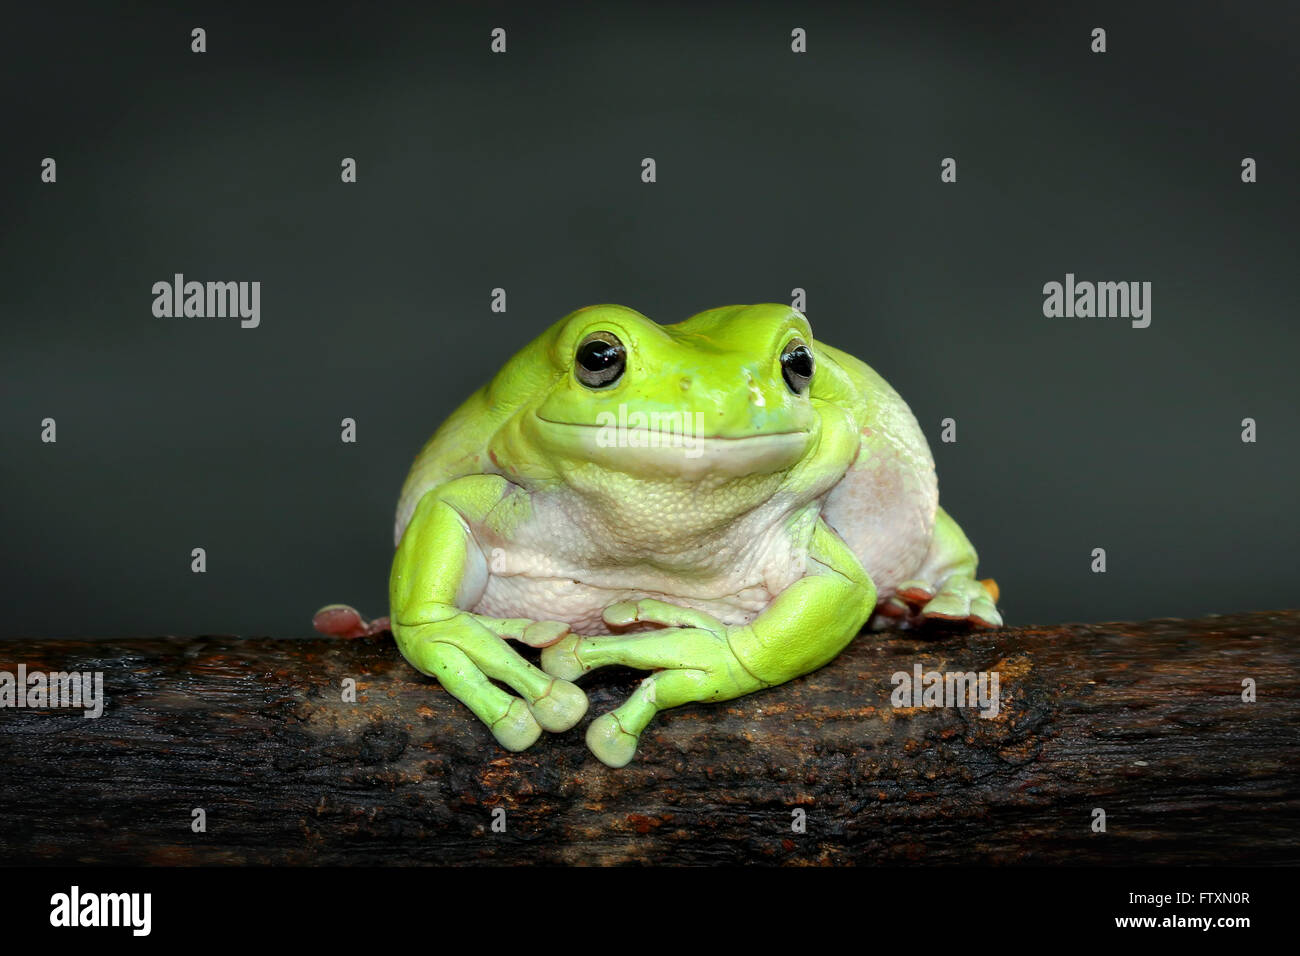 Portrait of a dumpy tree frog sitting on branch, Indonesia Stock Photo